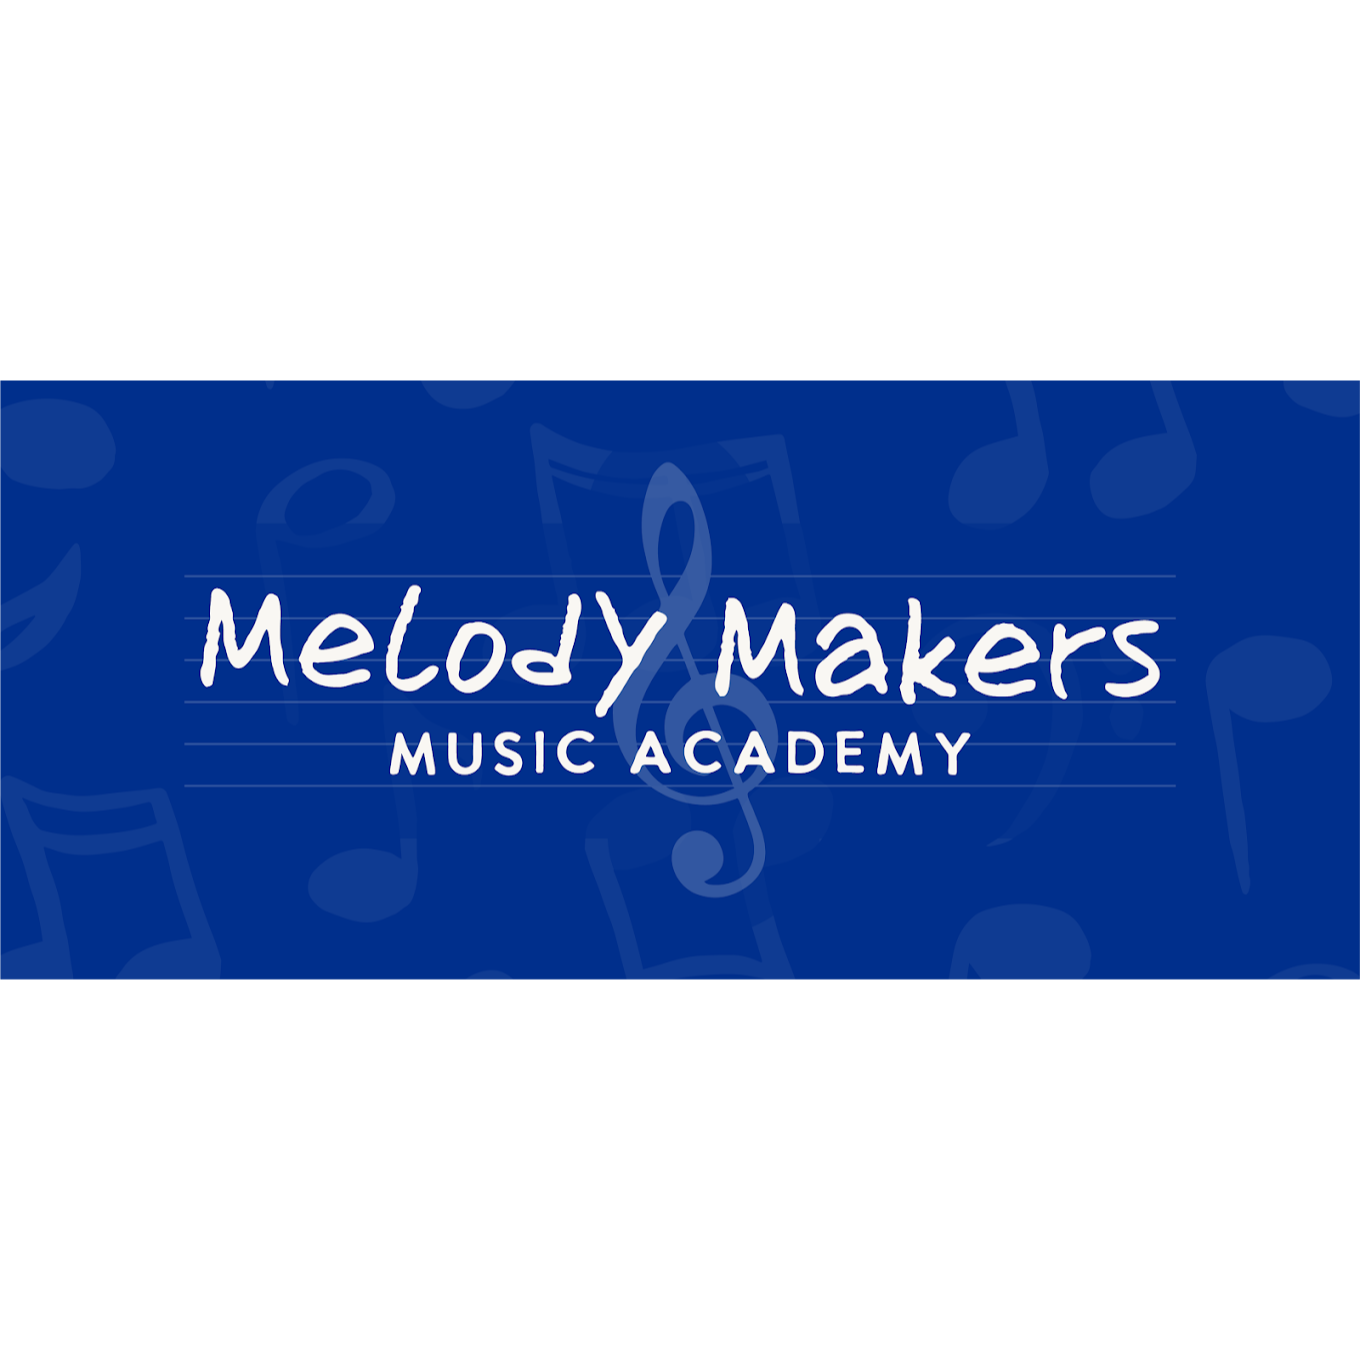 Melody Makers Music Academy